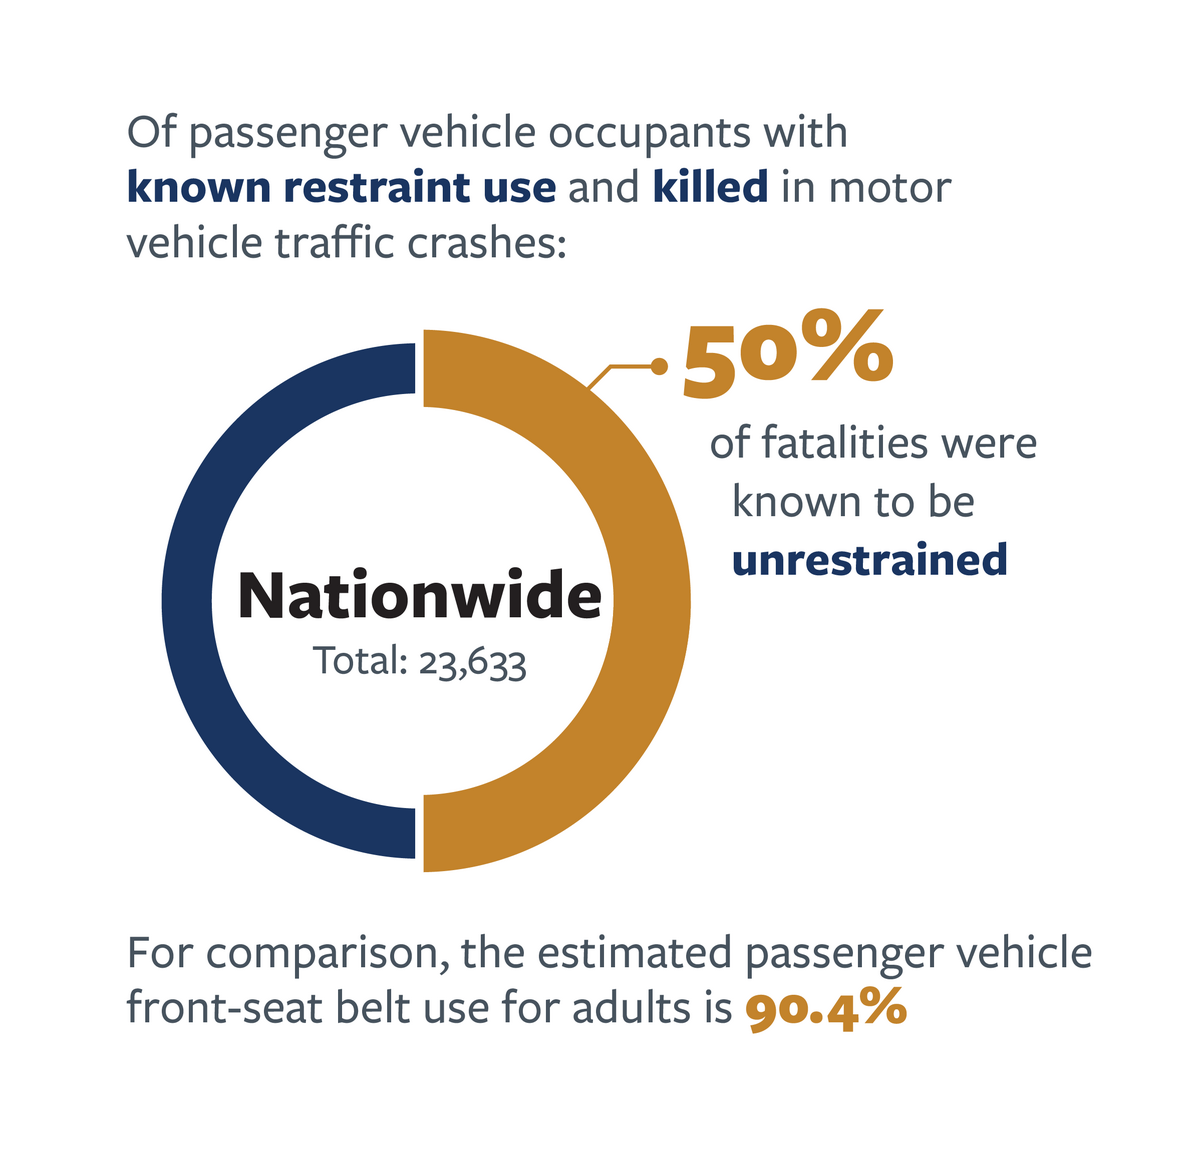 Infographic detailing unrestrained fatal crashes in crashes with known restraint use nationwide in 2021. For more information, go to the following summary.